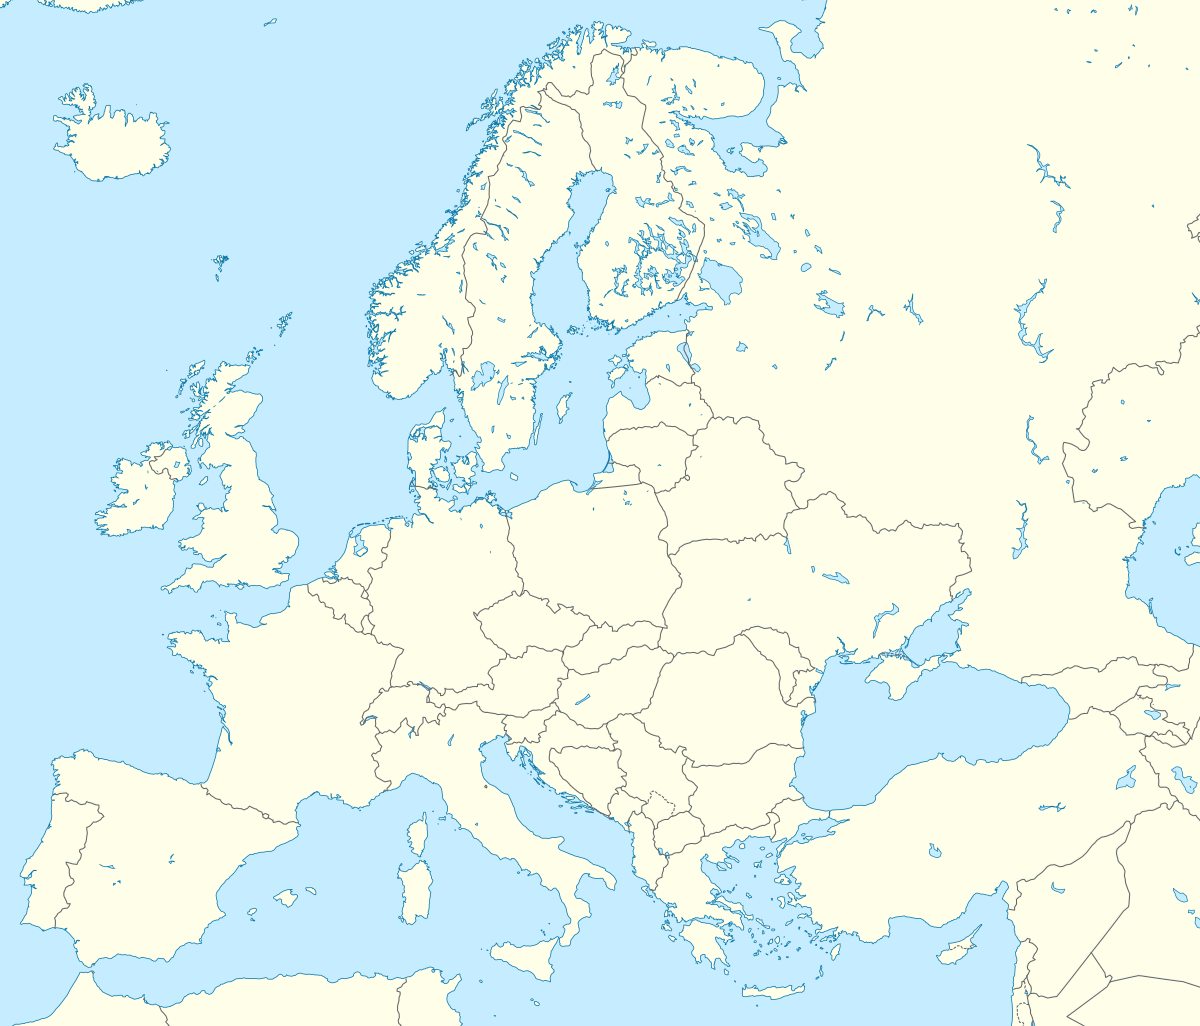 European Geoparks Network is located in Europe